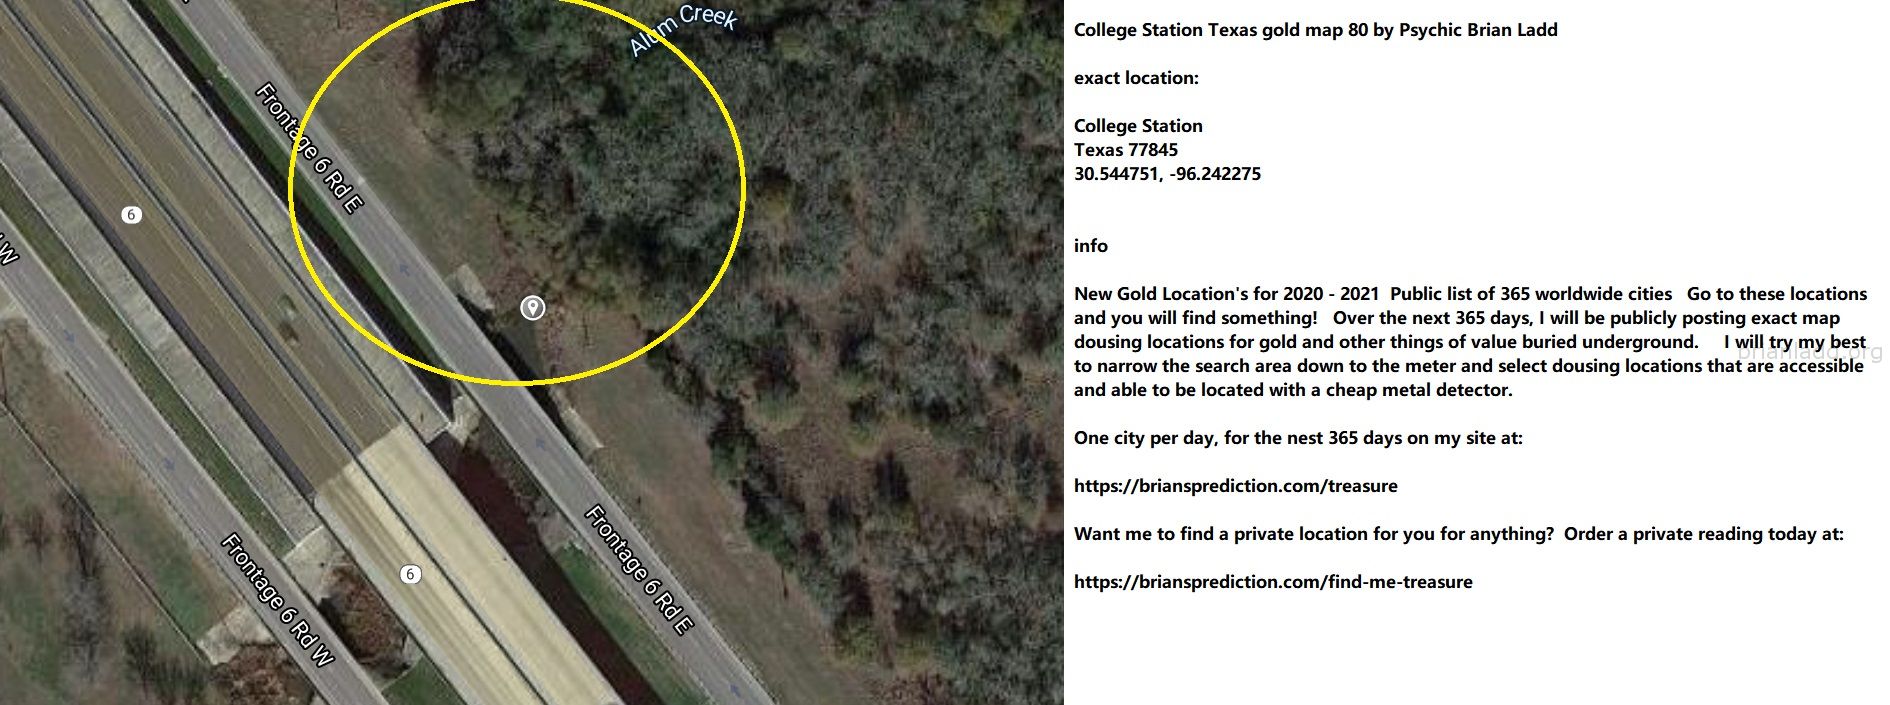 College Station Texas Gold Map 80 By Psychic Brian Ladd - College Station Texas Gold Map 80 By Psychic Brian Ladd  Exact...
College Station Texas Gold Map 80 By Psychic Brian Ladd  Exact Location:  College Station  Texas 77845  30.544751, -96.242275  Info  New Gold Location'S For 2020 - 2021  Public List Of 365 Worldwide Cities  Go To These Locations And You Will Find Something!  Over The Next 365 Days, I Will Be Publicly Posting Exact Map Dousing Locations For Gold And Other Things Of Value Buried Underground.  I Will Try My Best To Narrow The Search Area Down To The Meter And Select Dousing Locations That Are Accessible And Able To Be Located With A Cheap Metal Detector.  One City Per Day, For The Nest 365 Days On My Site At:   https://briansprediction.com/Treasure  Want Me To Find A Private Location For You For Anything?  Order A Private Reading Today At:   https://briansprediction.com/Find-Me-Treasure
